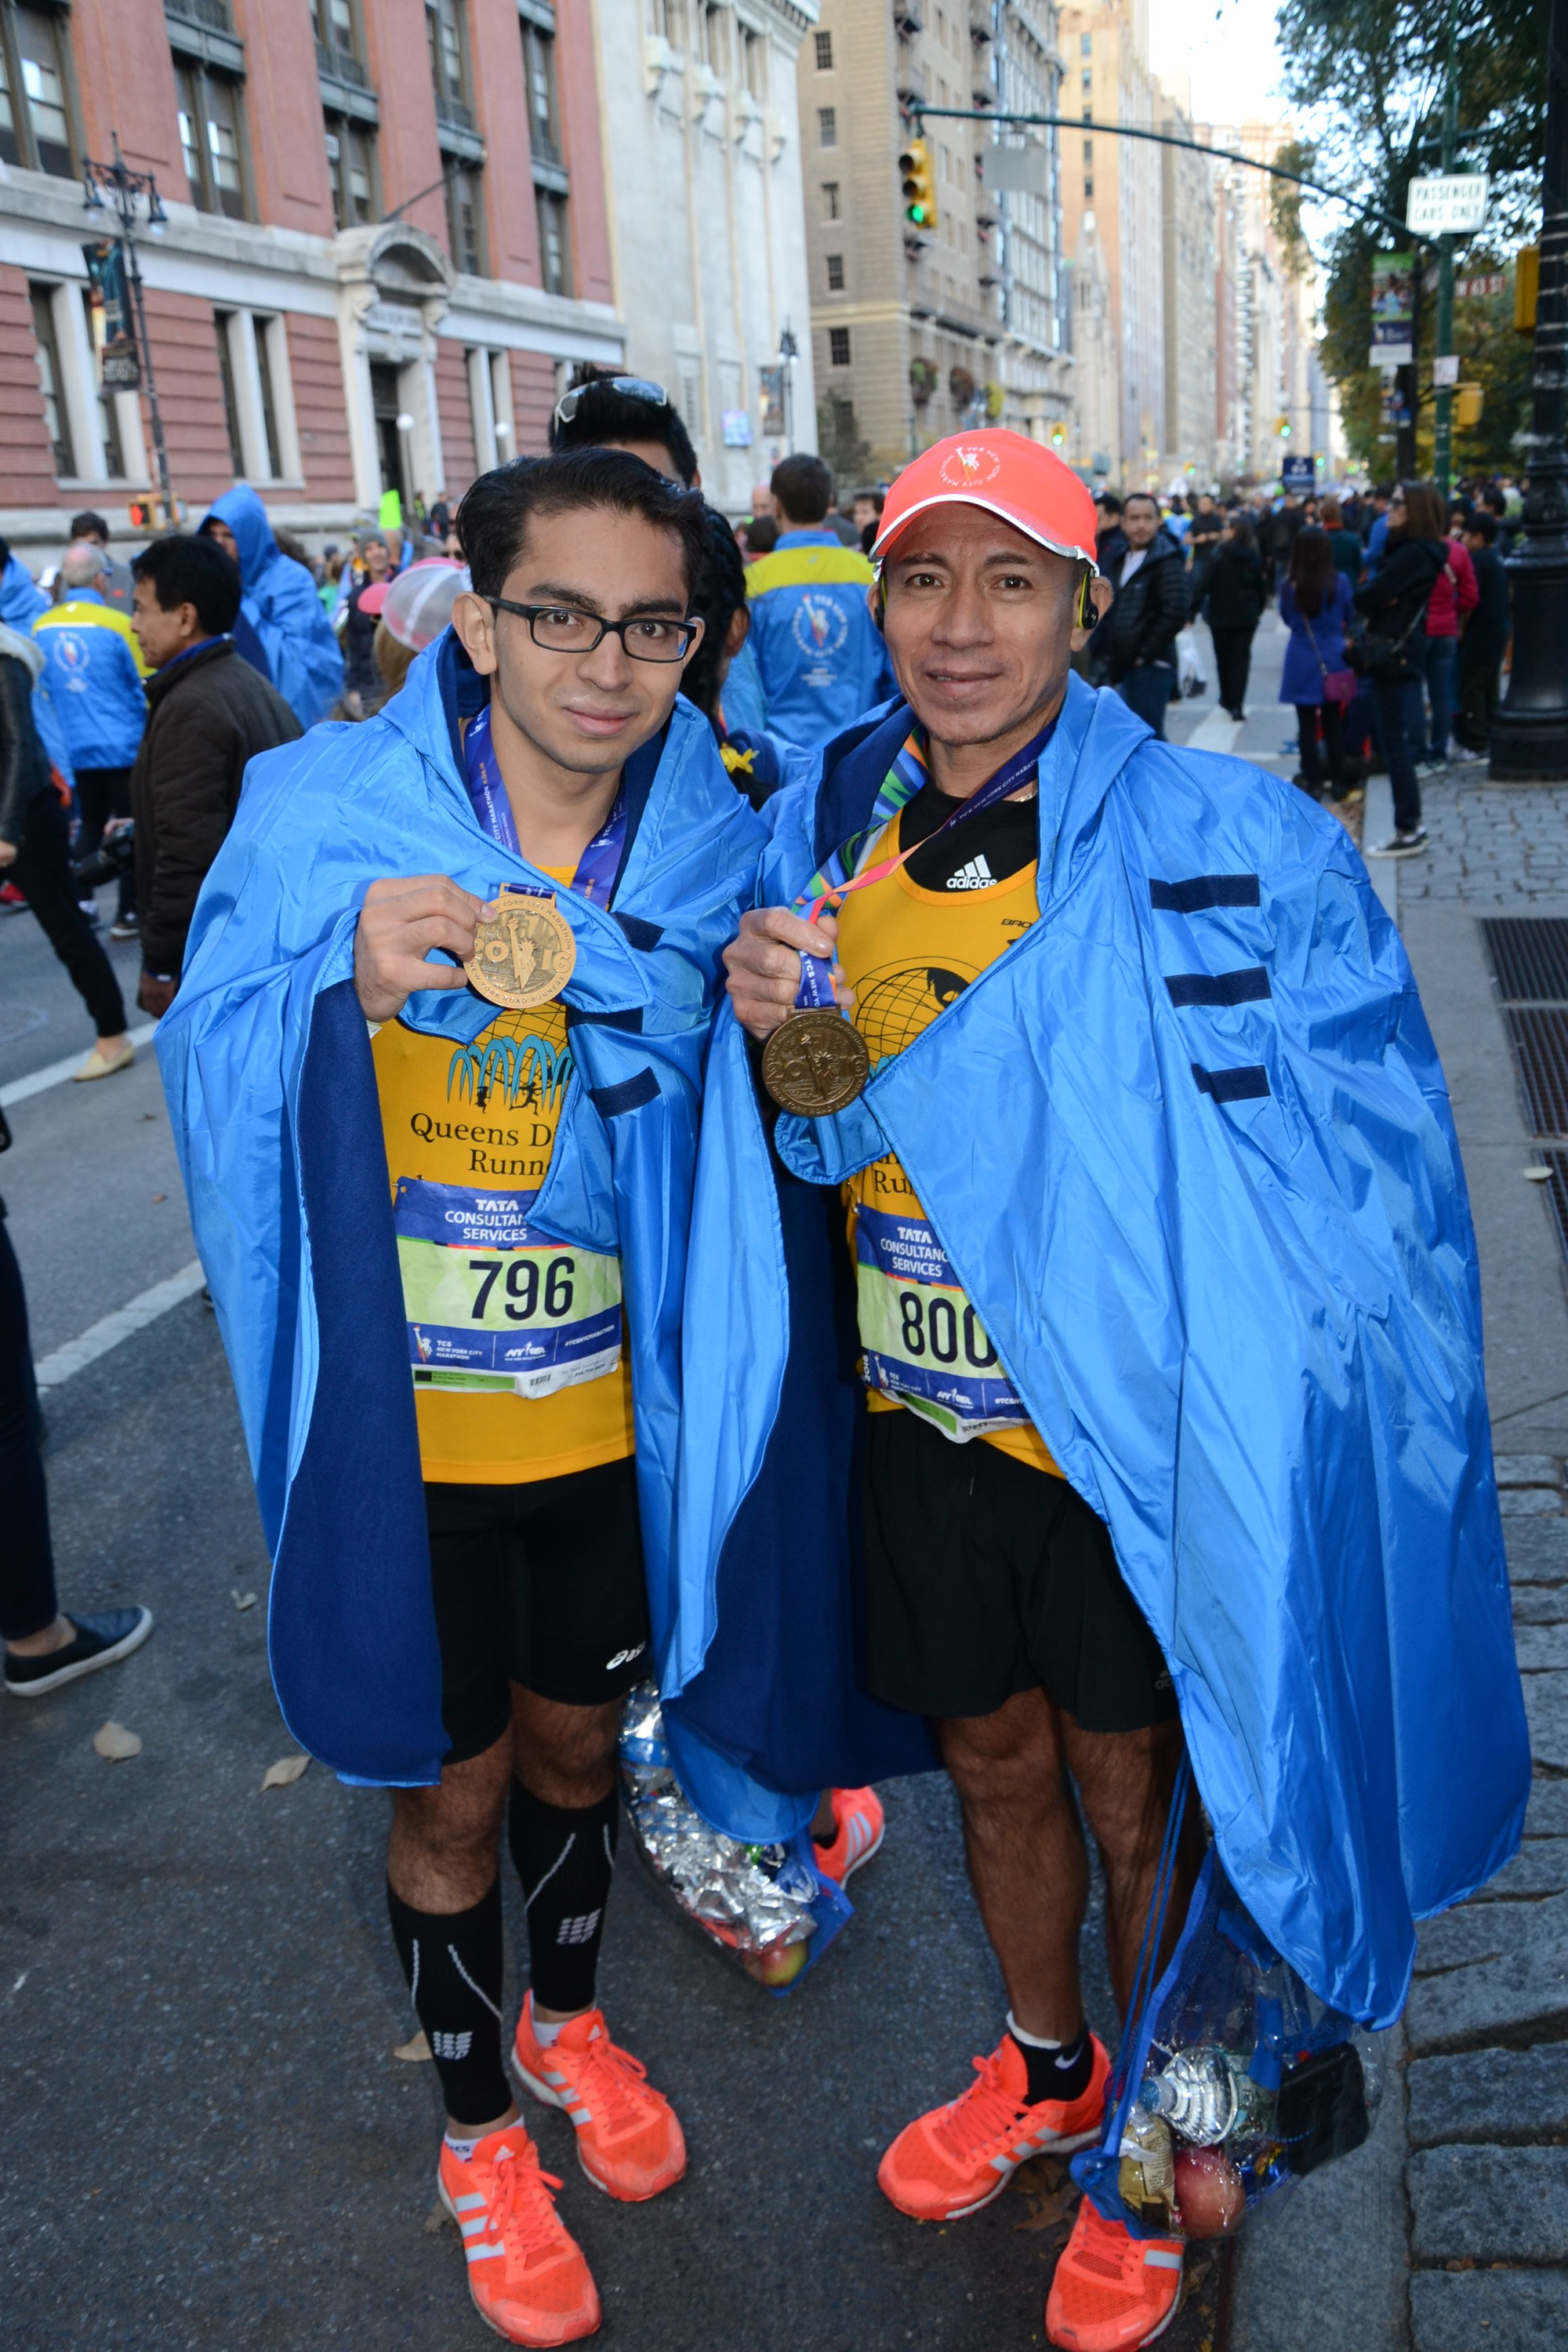 Reunited with my father after the NYC Marathon.